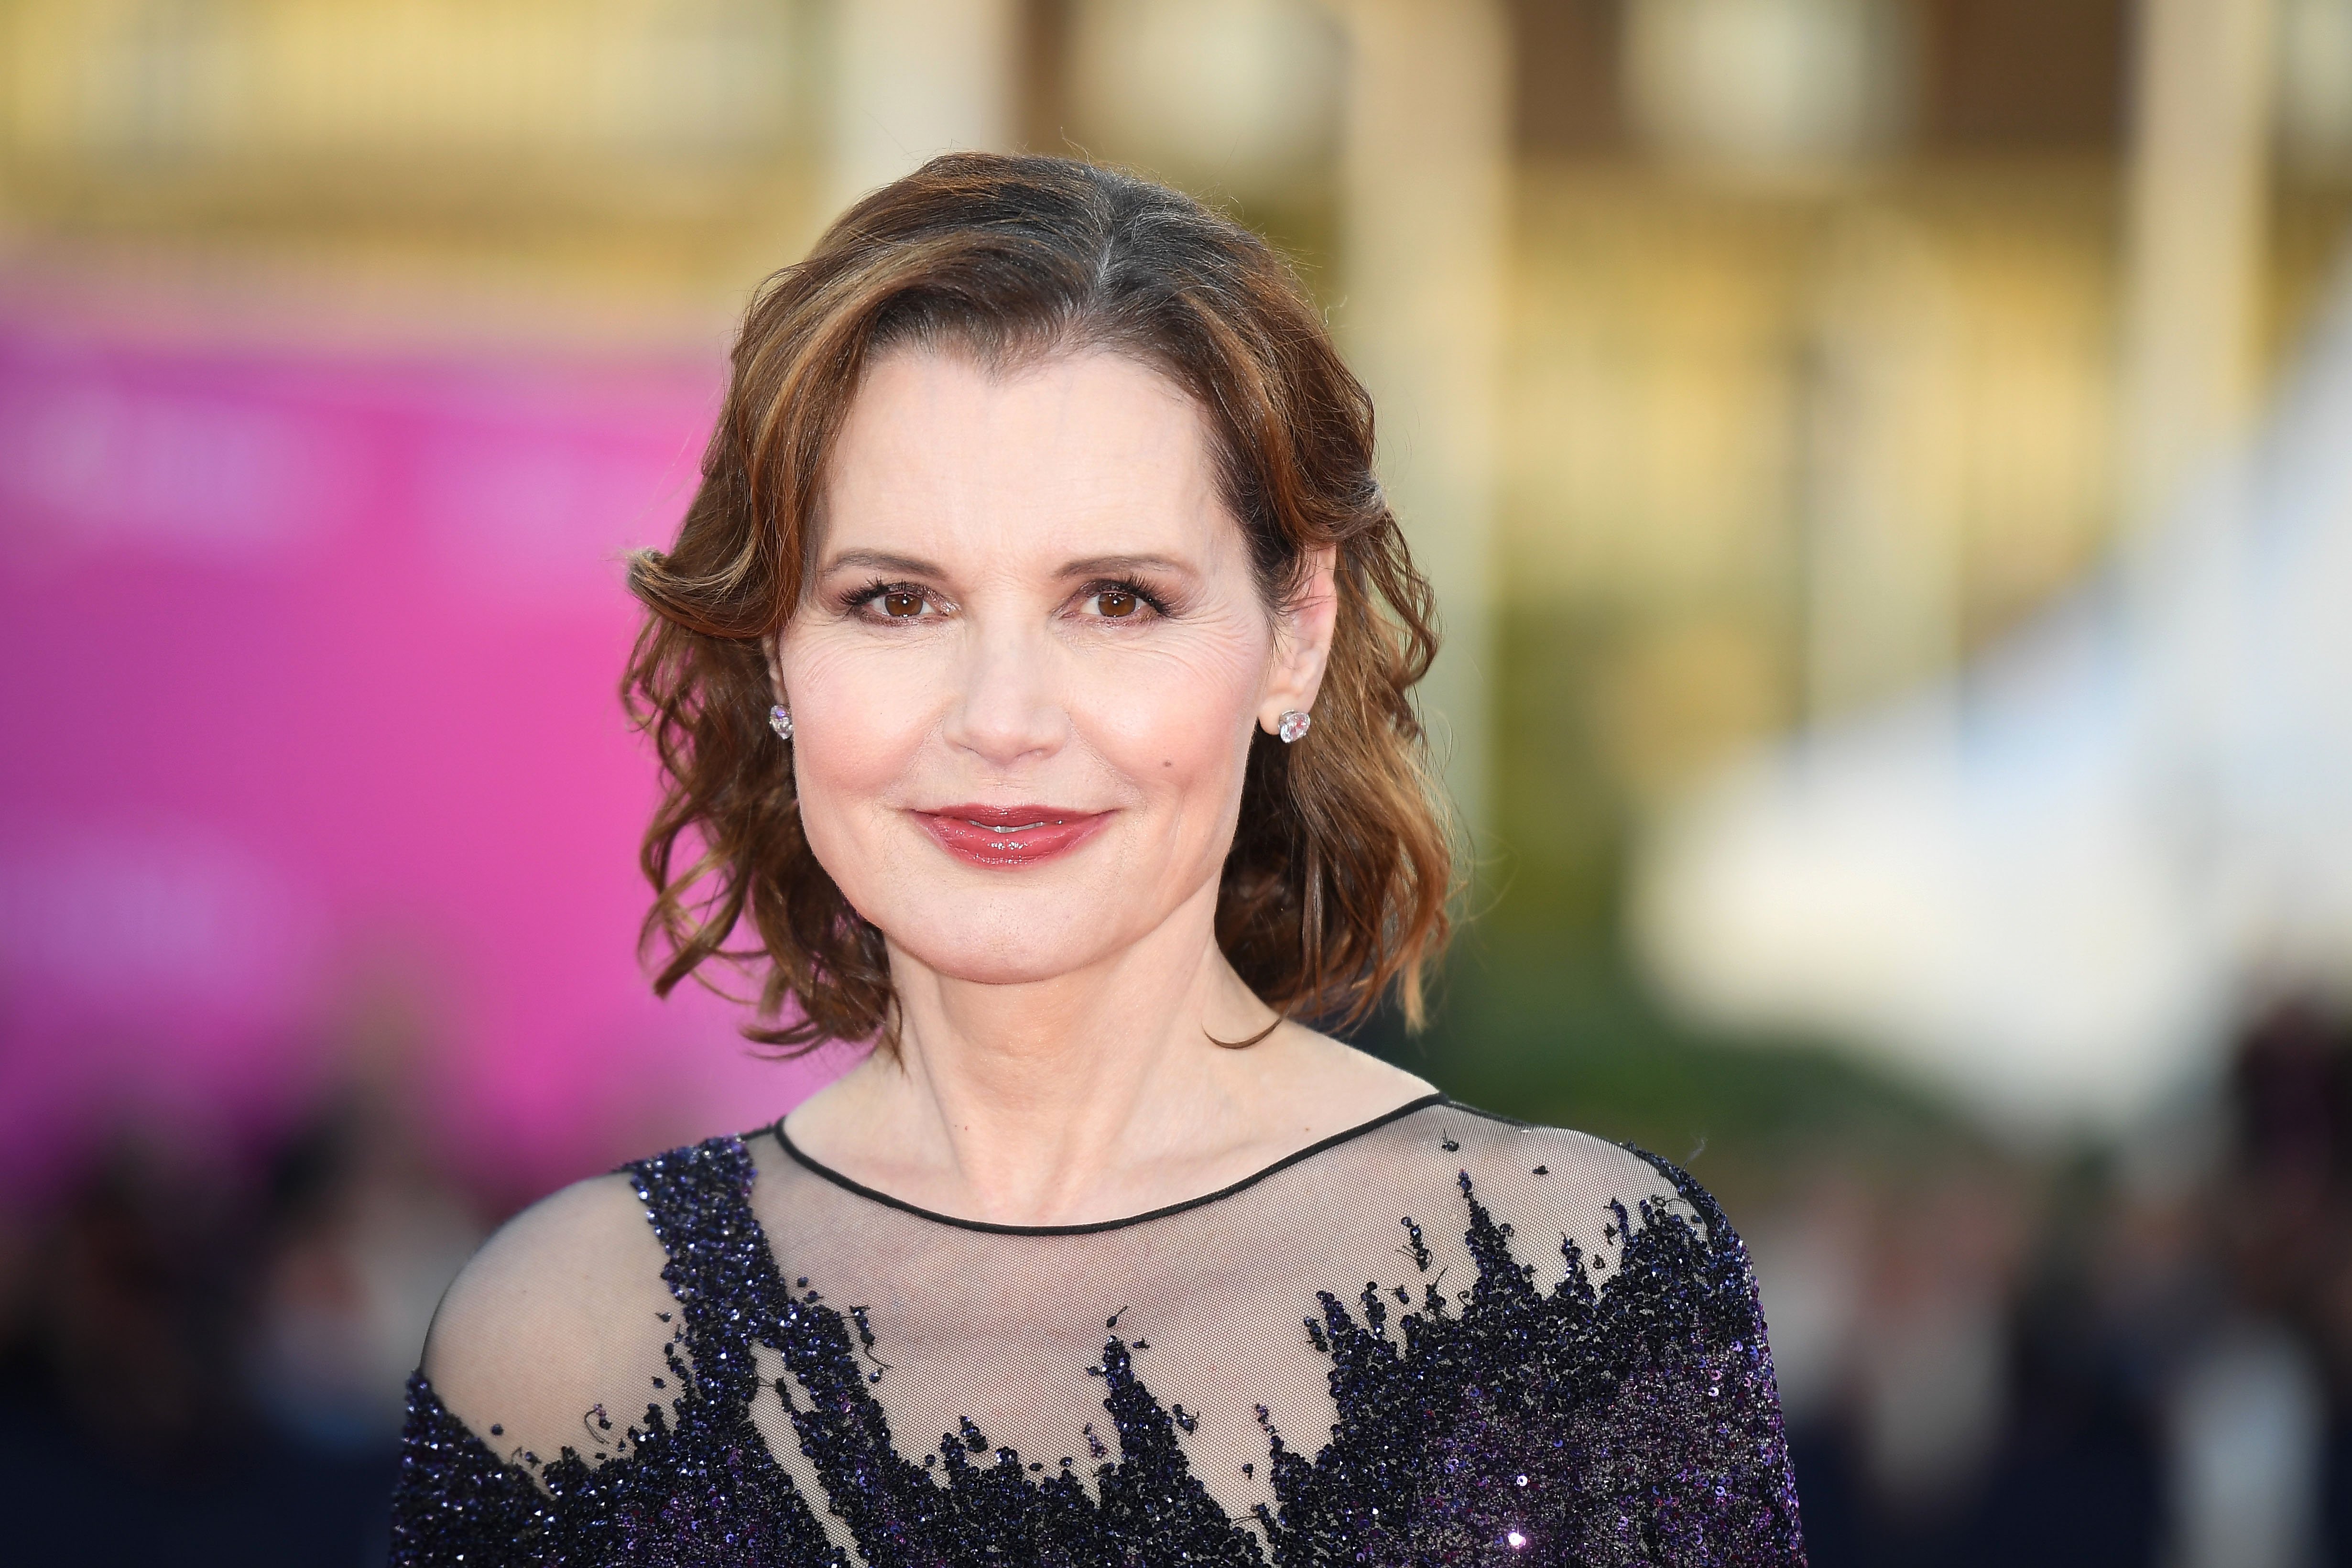 Geena Davis at the Tribute To Geena Davis during the 45th Deauville American Film Festival on September 10, 2019 | Source: Getty Images